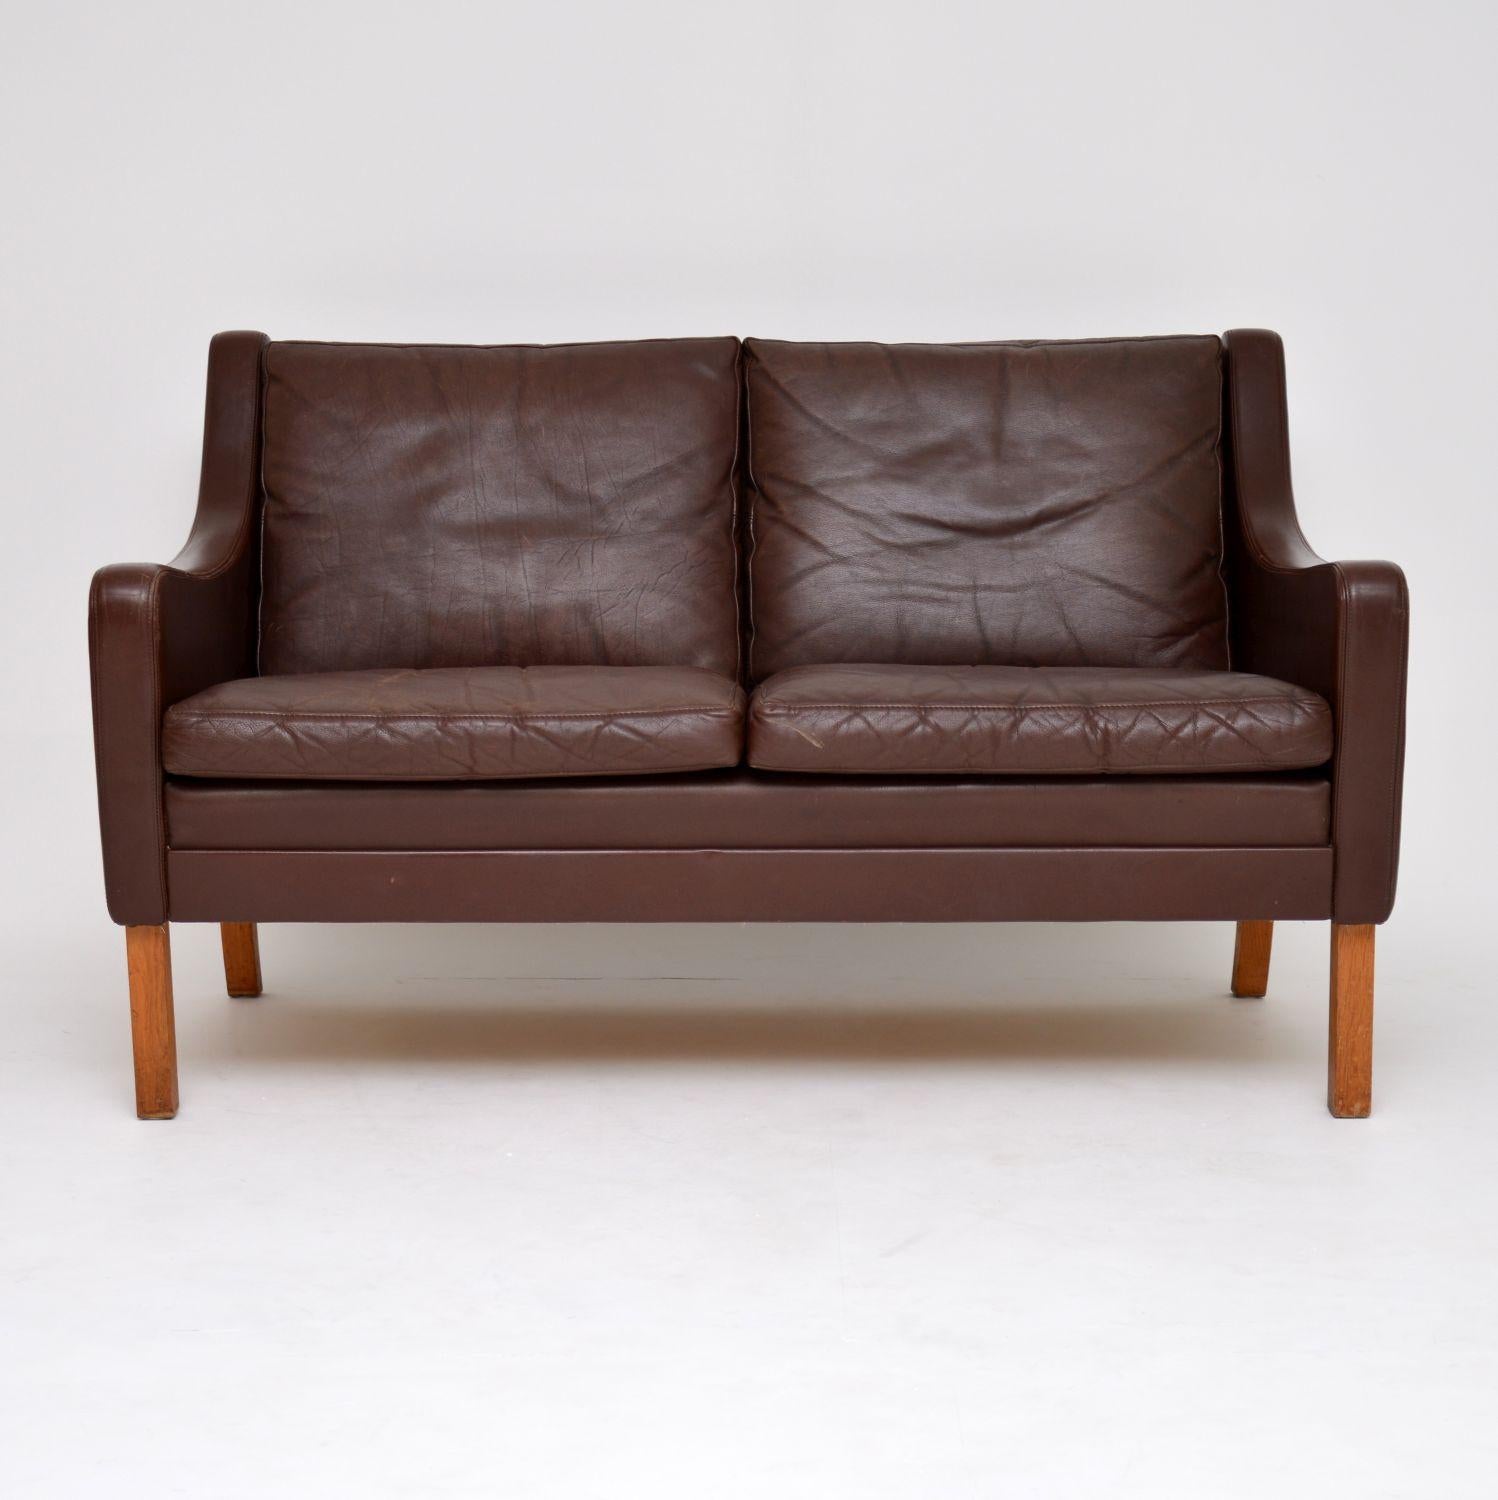 A stylish and very comfortable vintage Danish sofa in brown leather, this dates from the 1960s. It’s in lovely original condition, with just some minor wear and a lovely patina to the leather.

Measures: Width 122 cm, 48 inches
Depth 79 cm, 31